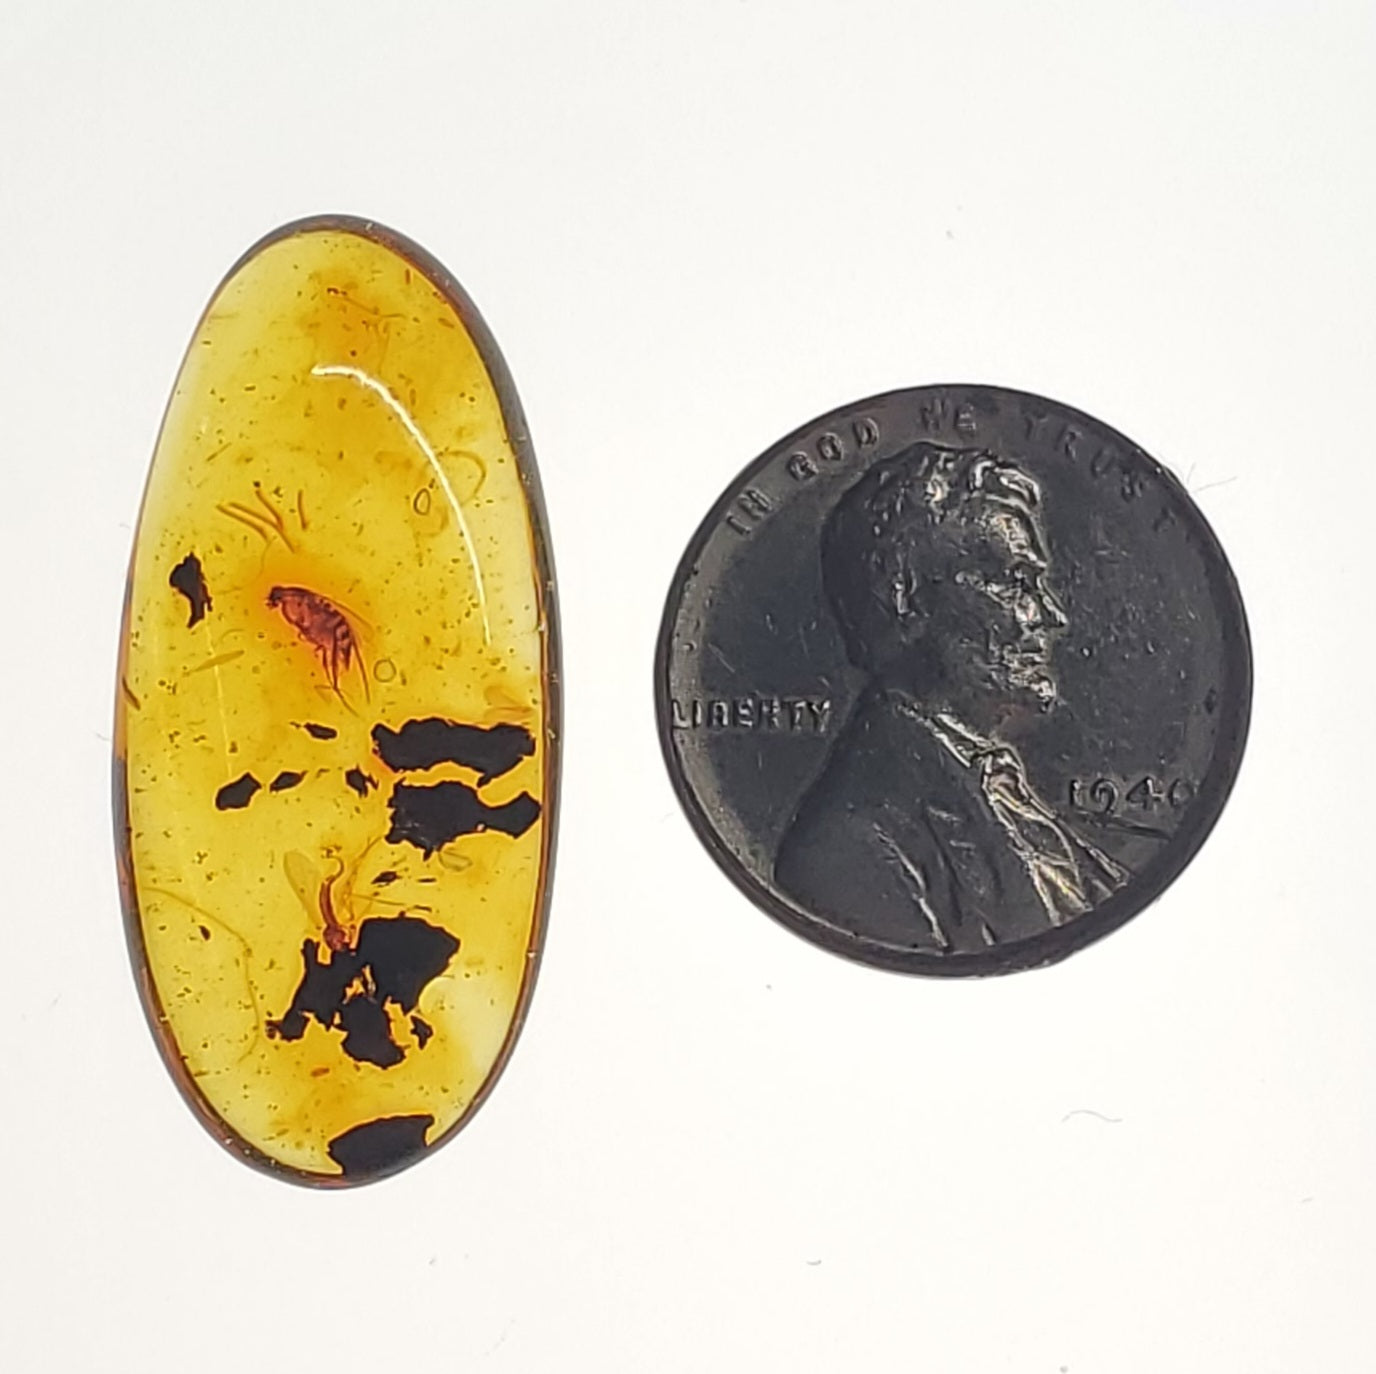 Amber with Insects and Inclusions